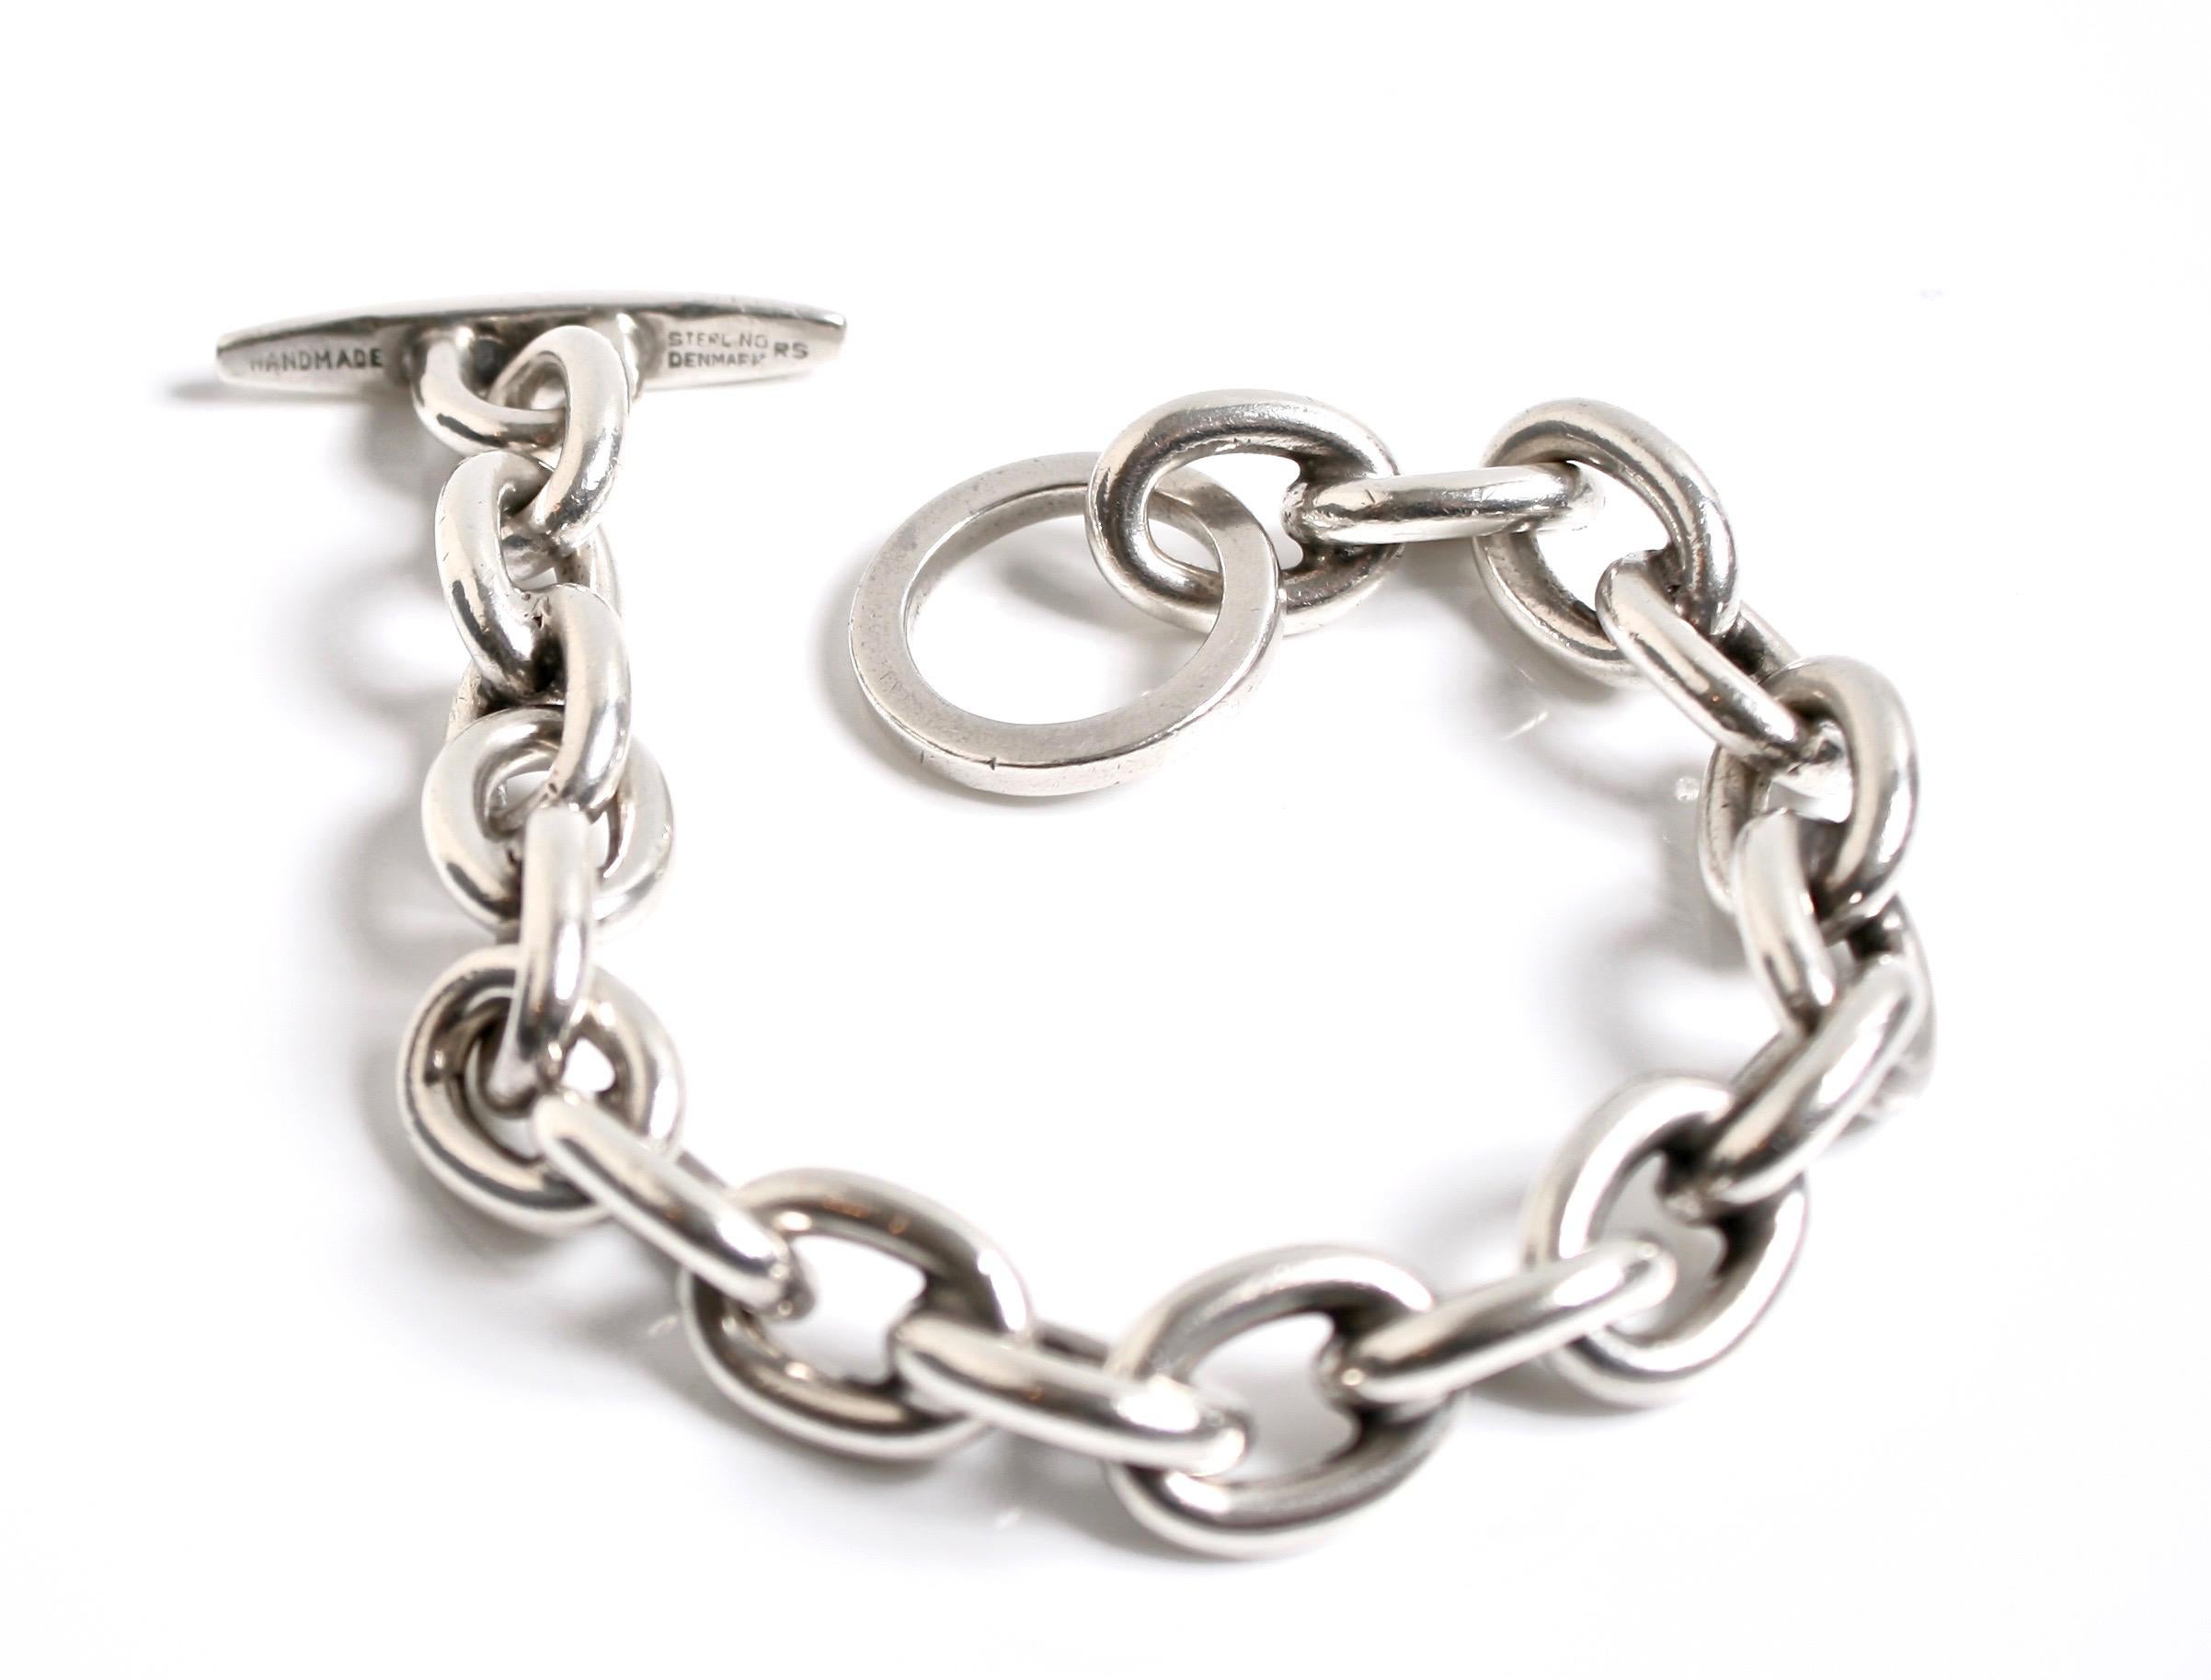 Heavy link sterling silver hand made chain bracelet designed by Randers Denmark c.1970 signed RS Denmark Rounded links with large O ring

